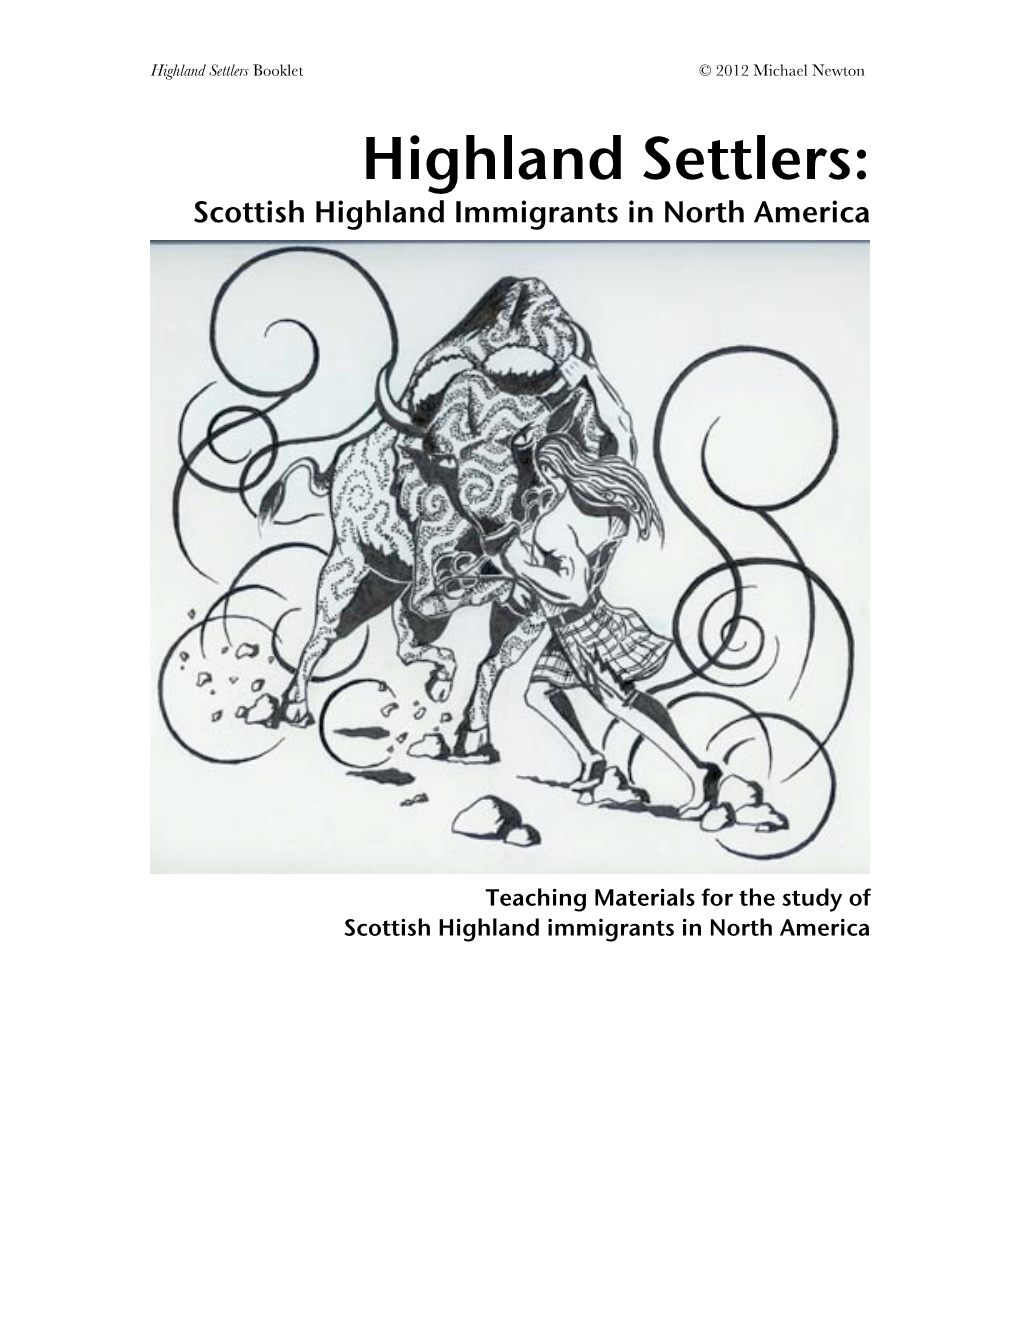 Highland Settlers: Scottish Highland Immigrants in North America